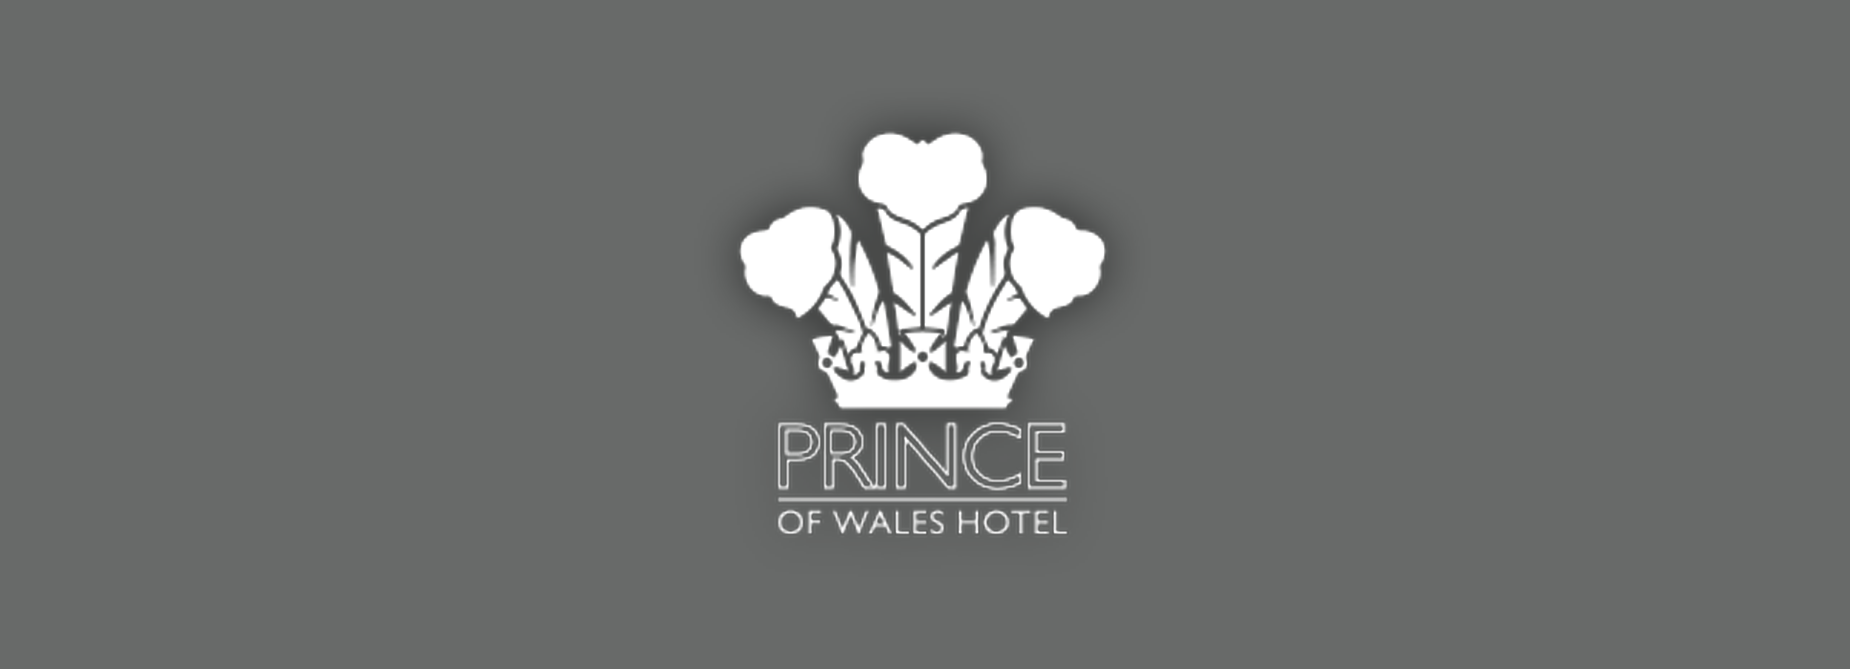 Prince Of Wales Hotel Logo